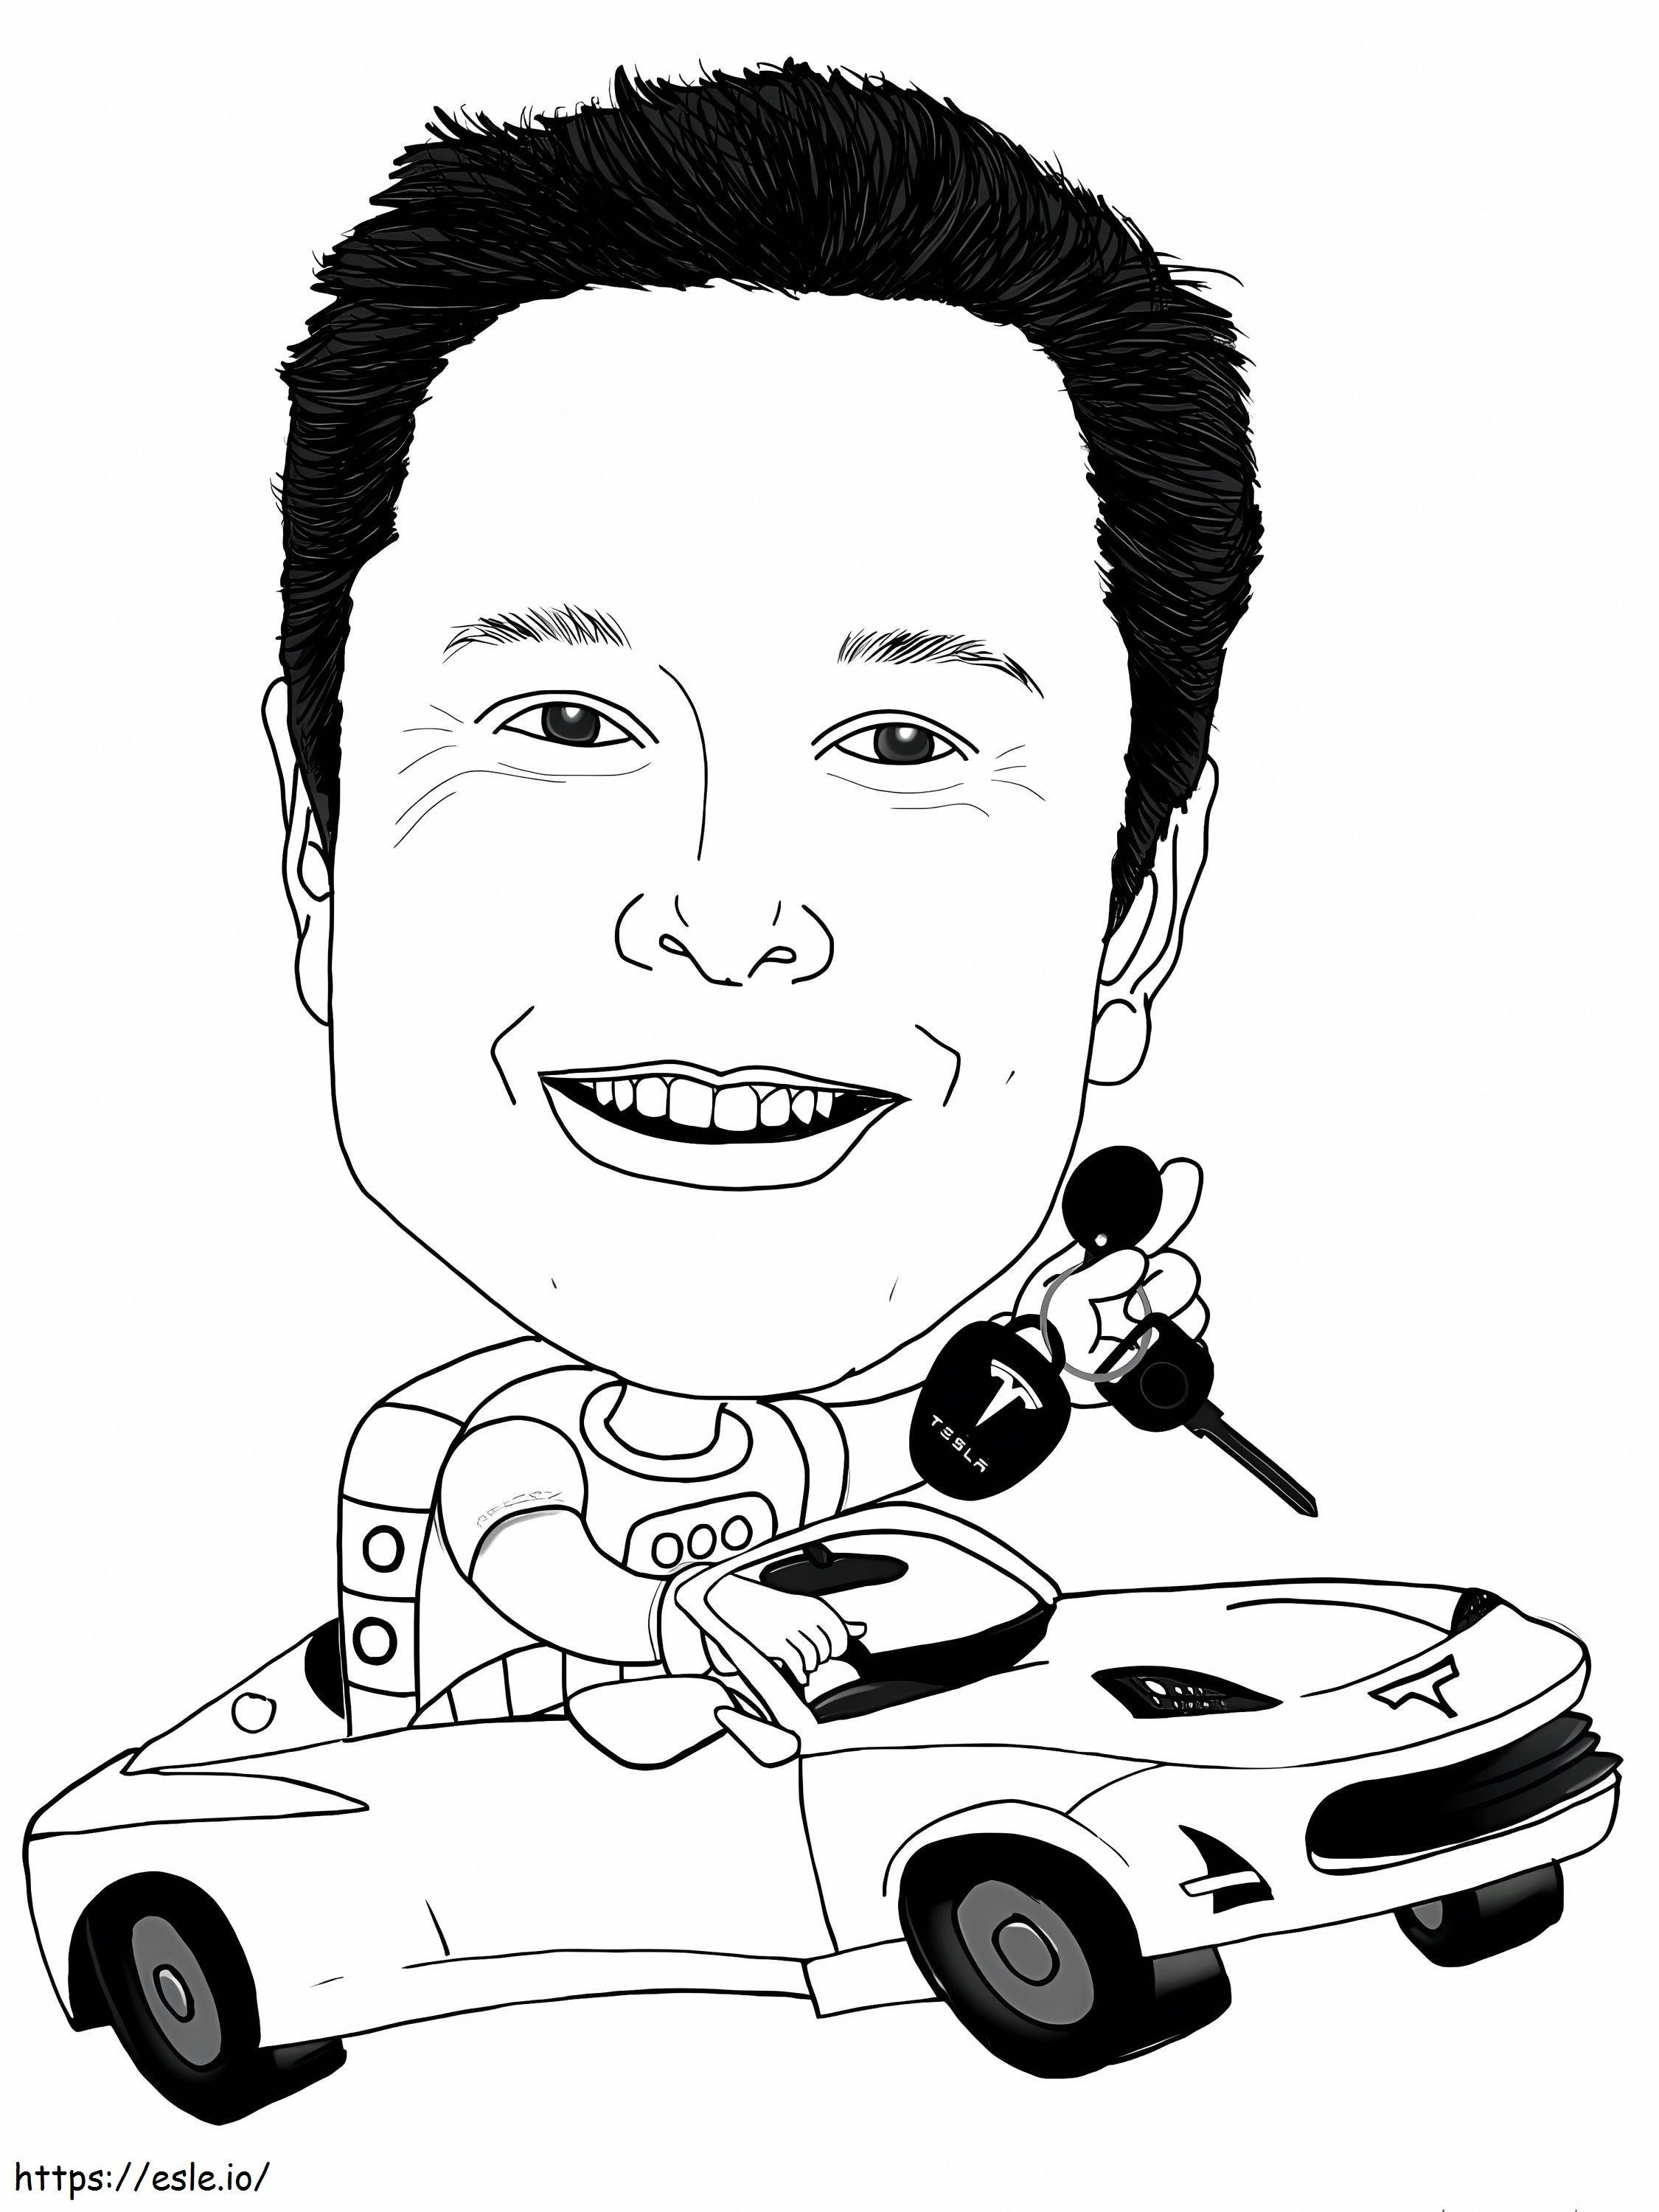 Funny Elon Musk coloring page